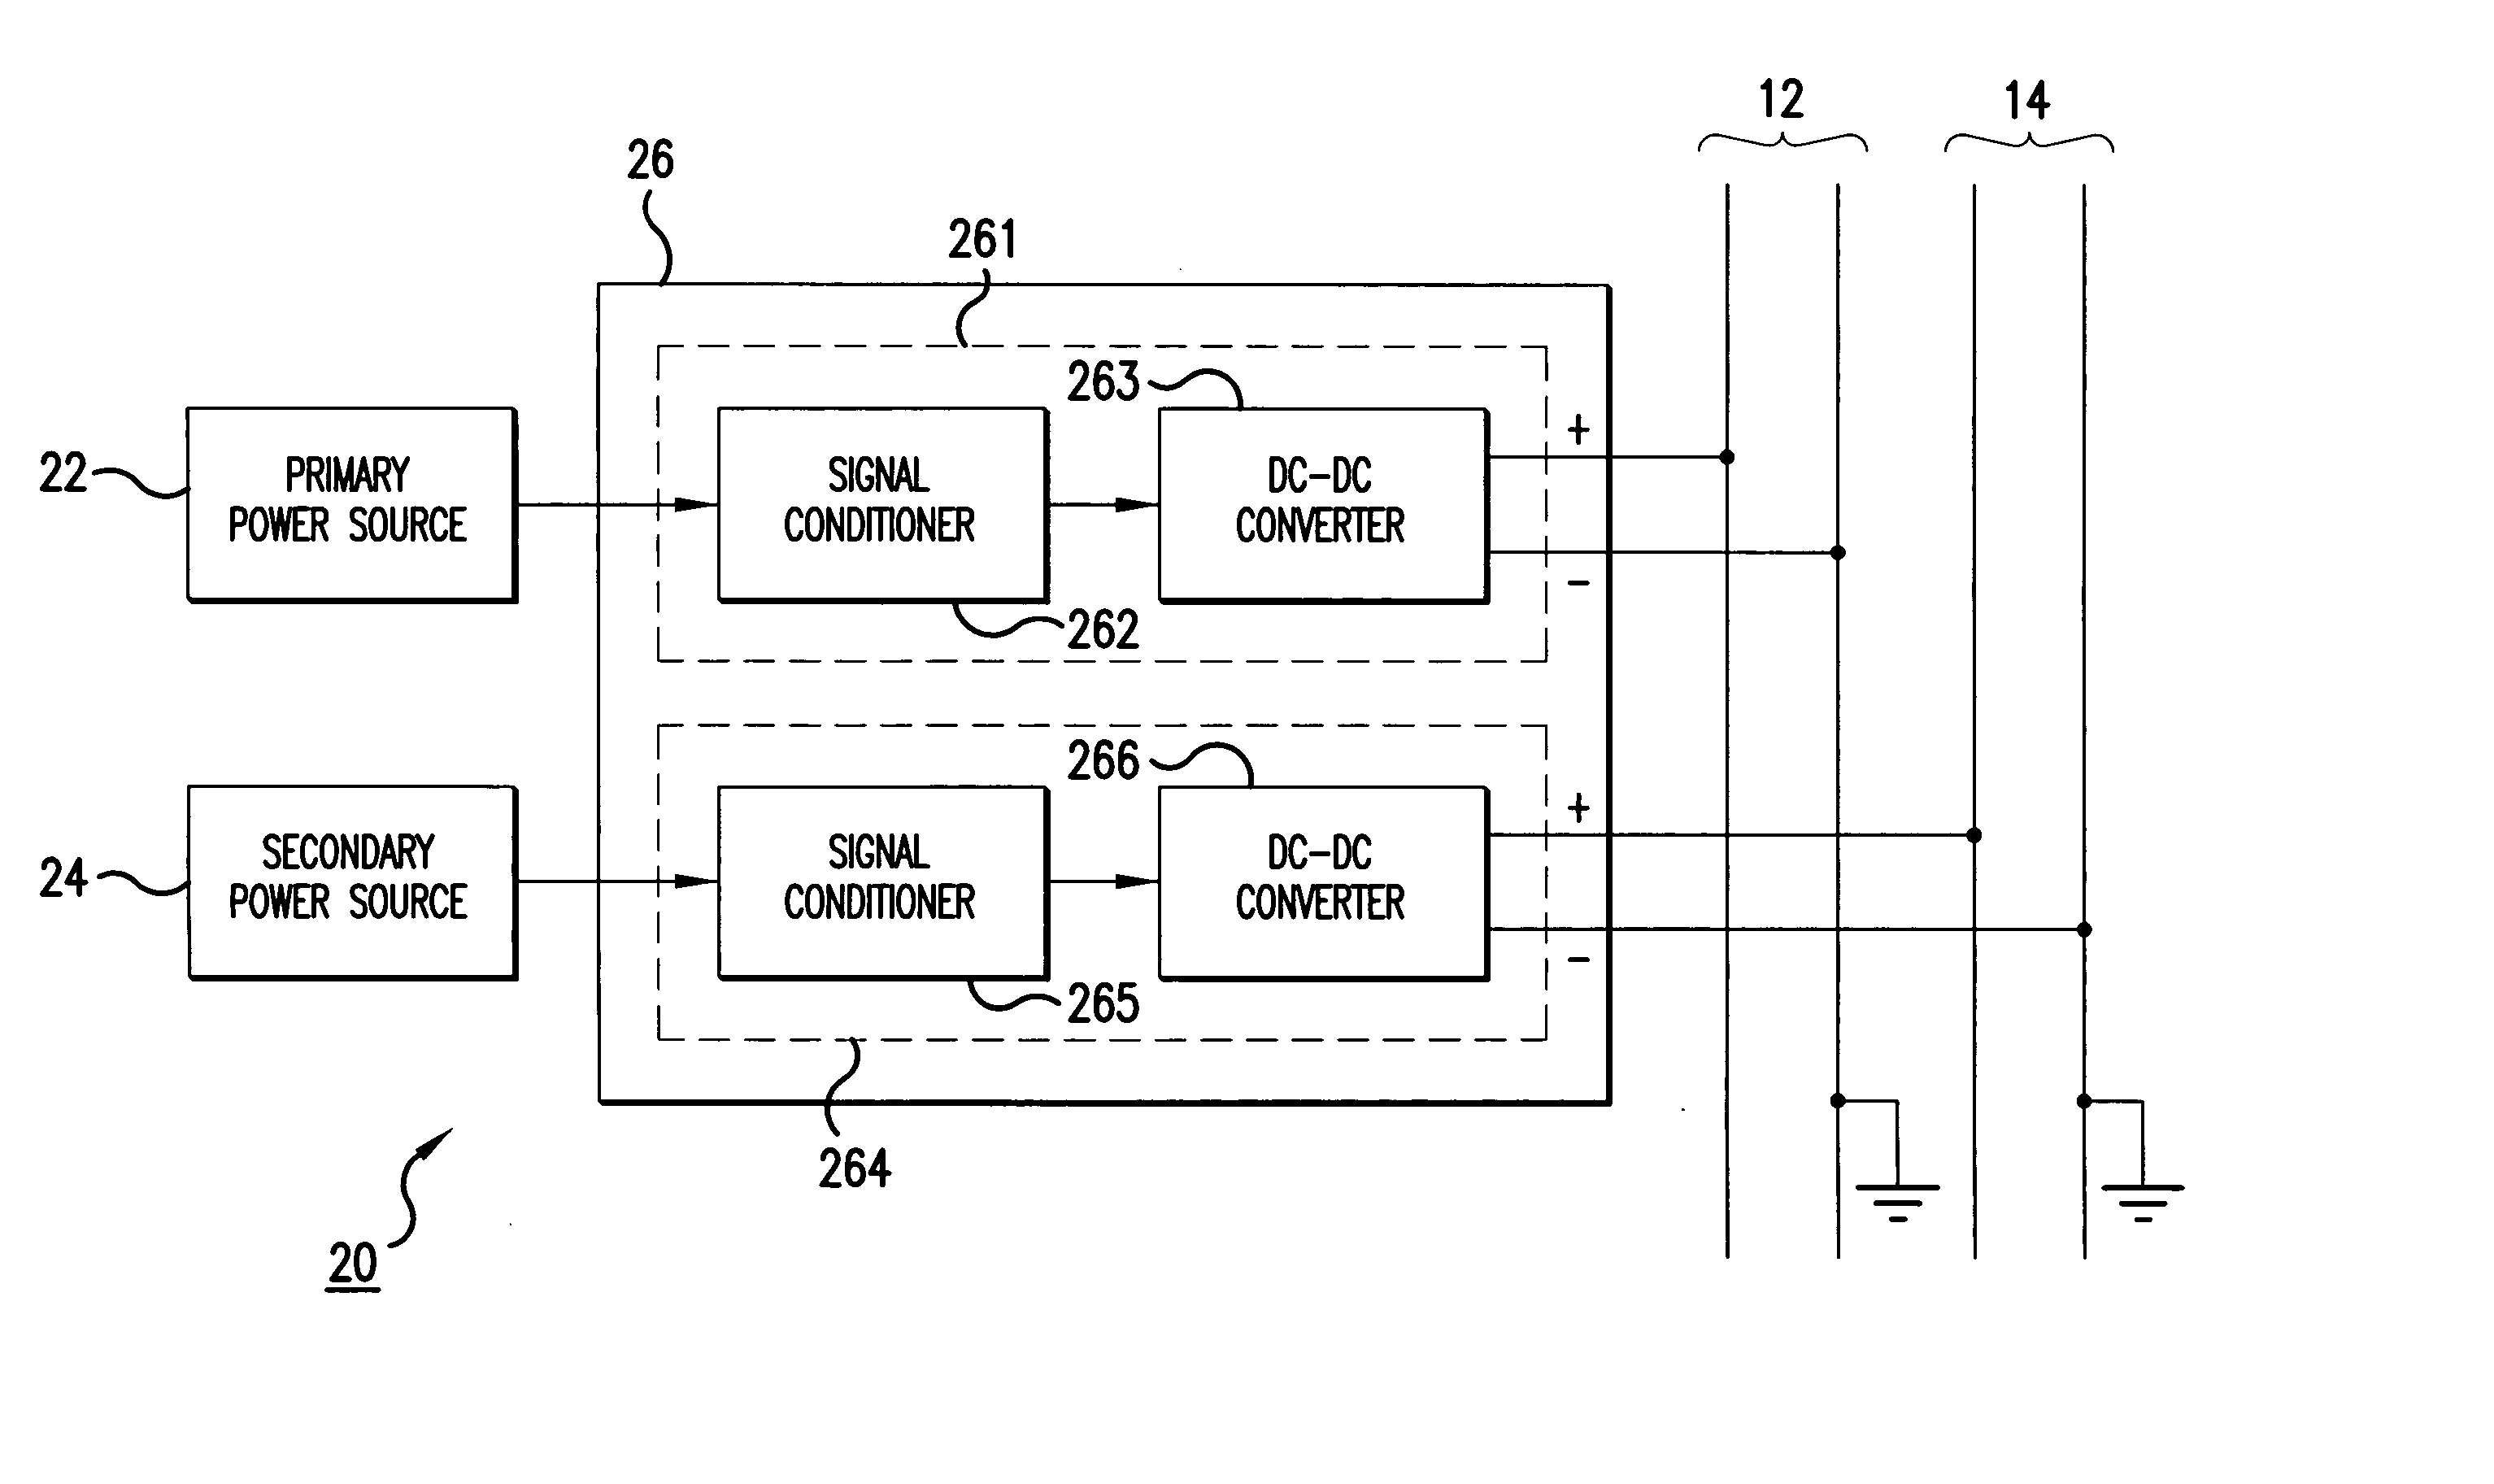 Generation and distribution of a dual-redundant logic supply voltage for an electrical system